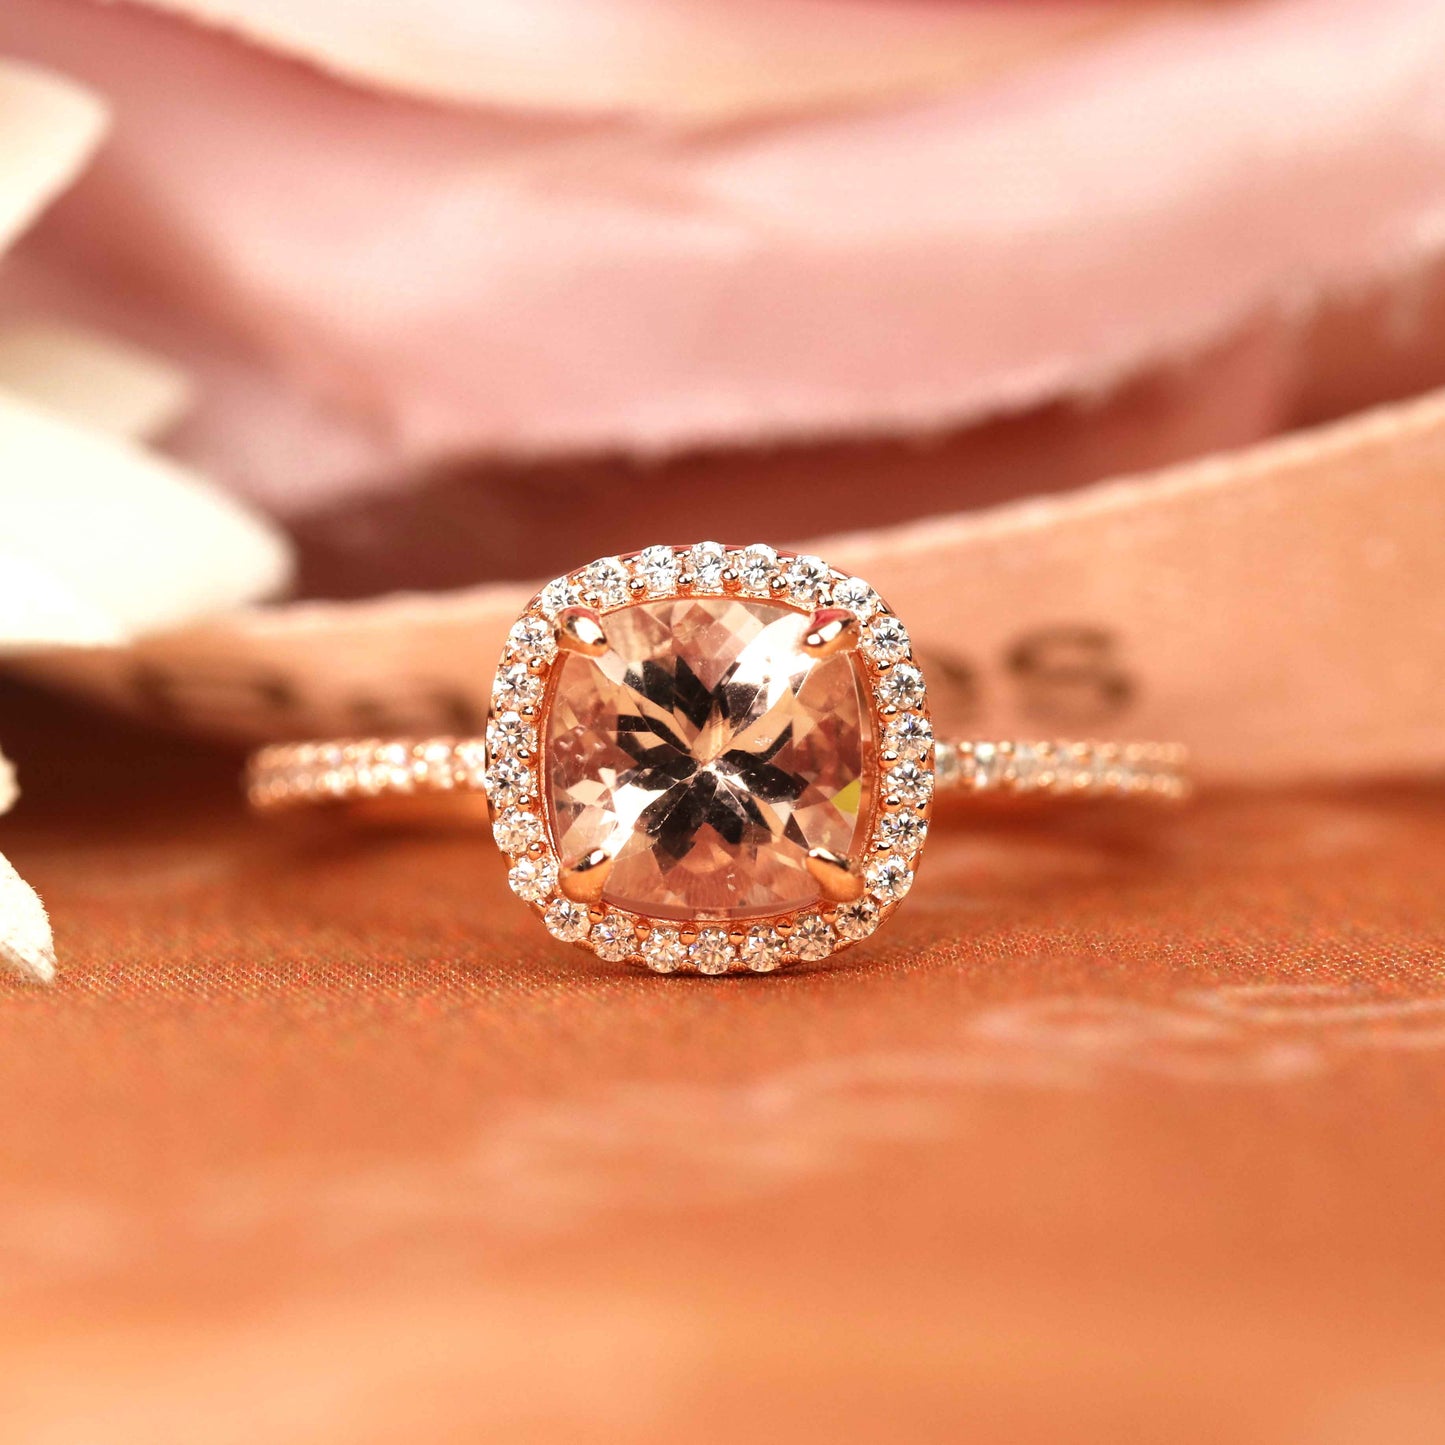 Sale 1.45 carat Cushion Cut Morganite with Diamond Halo Engagement Ring in Rose Gold